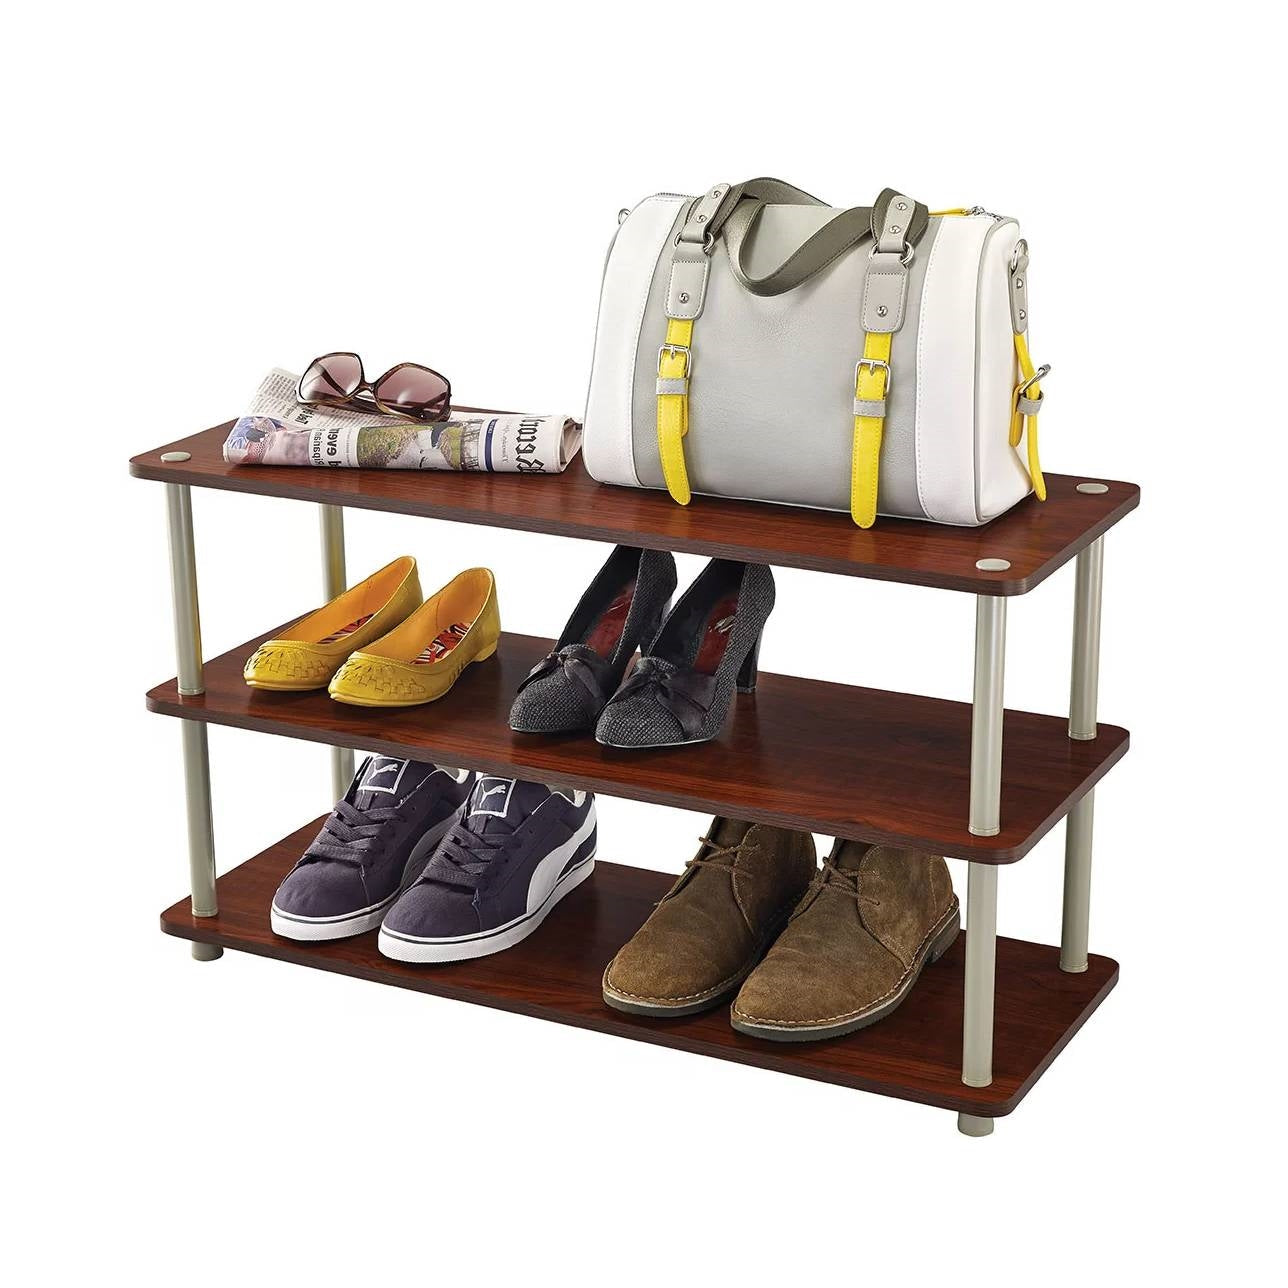 Accents > Shoe Racks - Dark Cherry 3-Shelf Modern Shoe Rack - Holds Up To 12 Pair Of Shoes